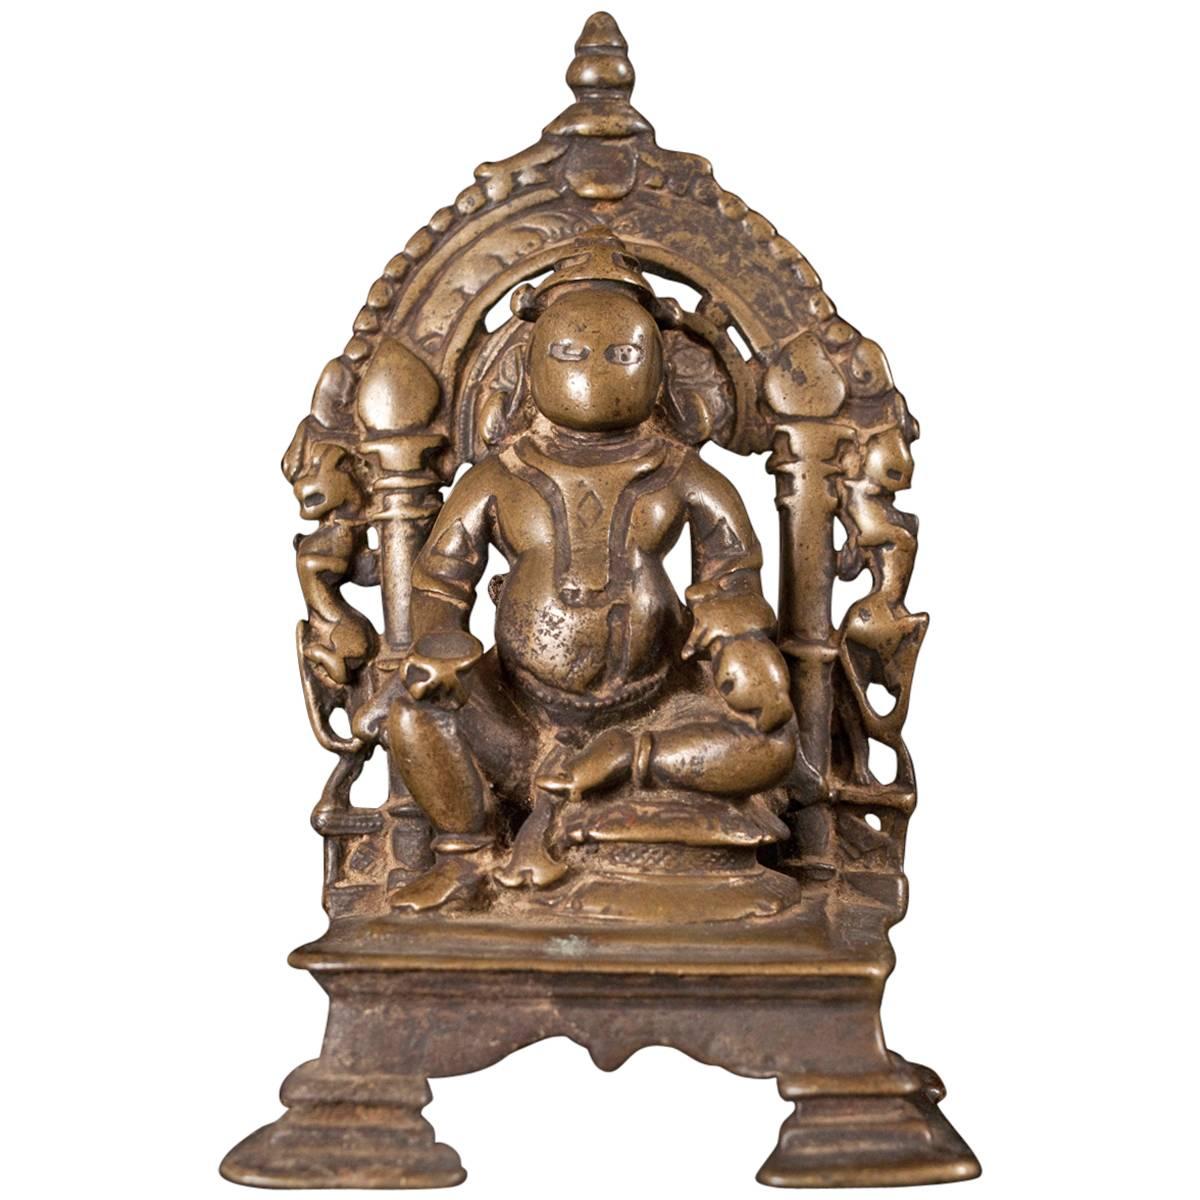 13th-16th Century Bronze Shrine for Kubera, the God of Riches from India